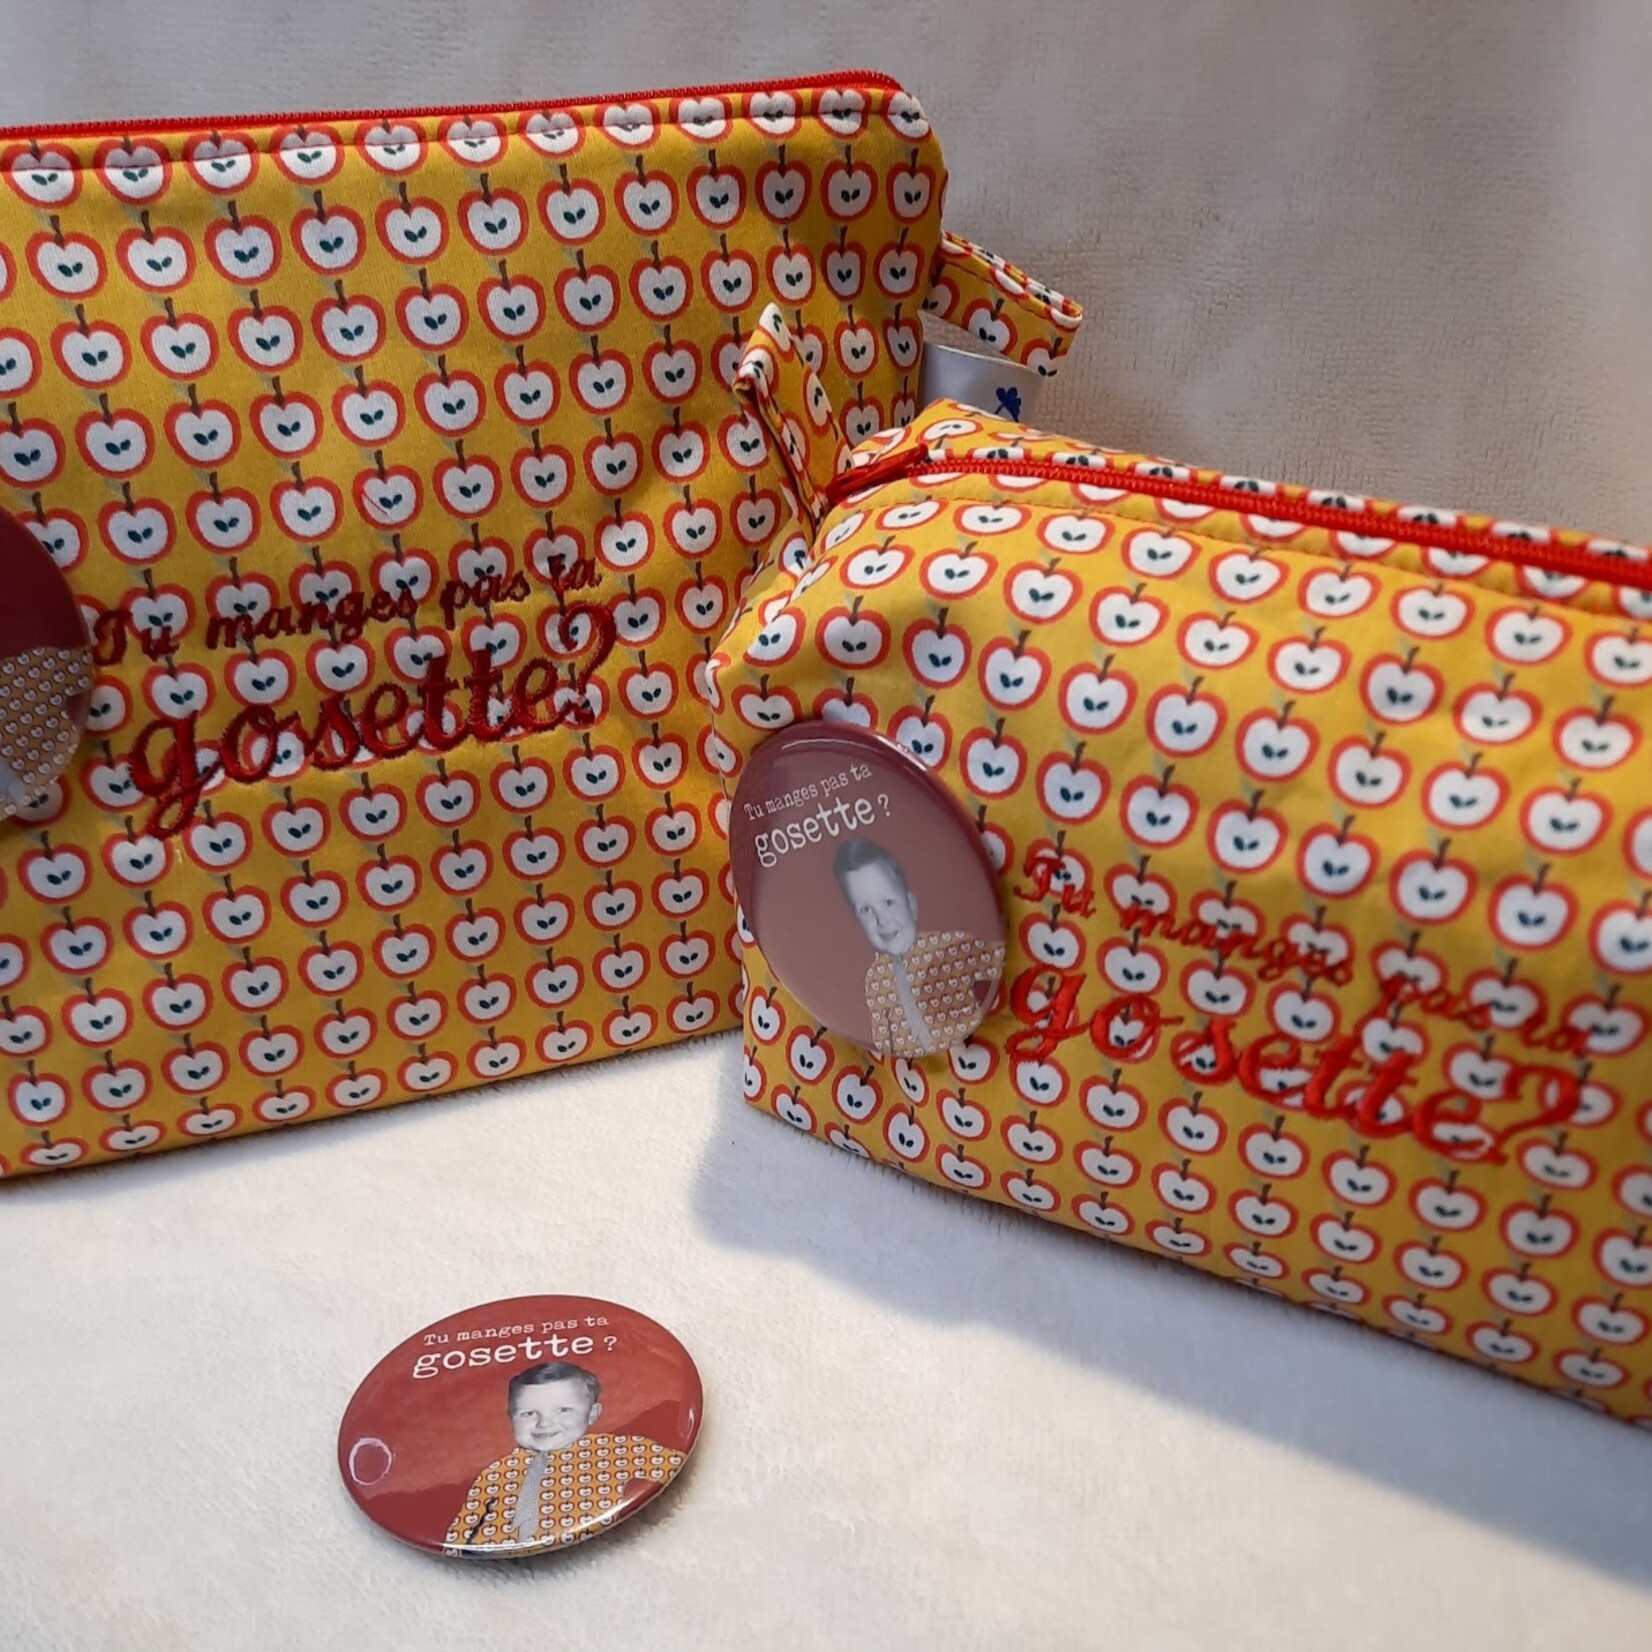 LES COUSETTES DE LUCETTE LES COUSETTES DE LUCETTE - Trousse feat Red Orb "Gosette"